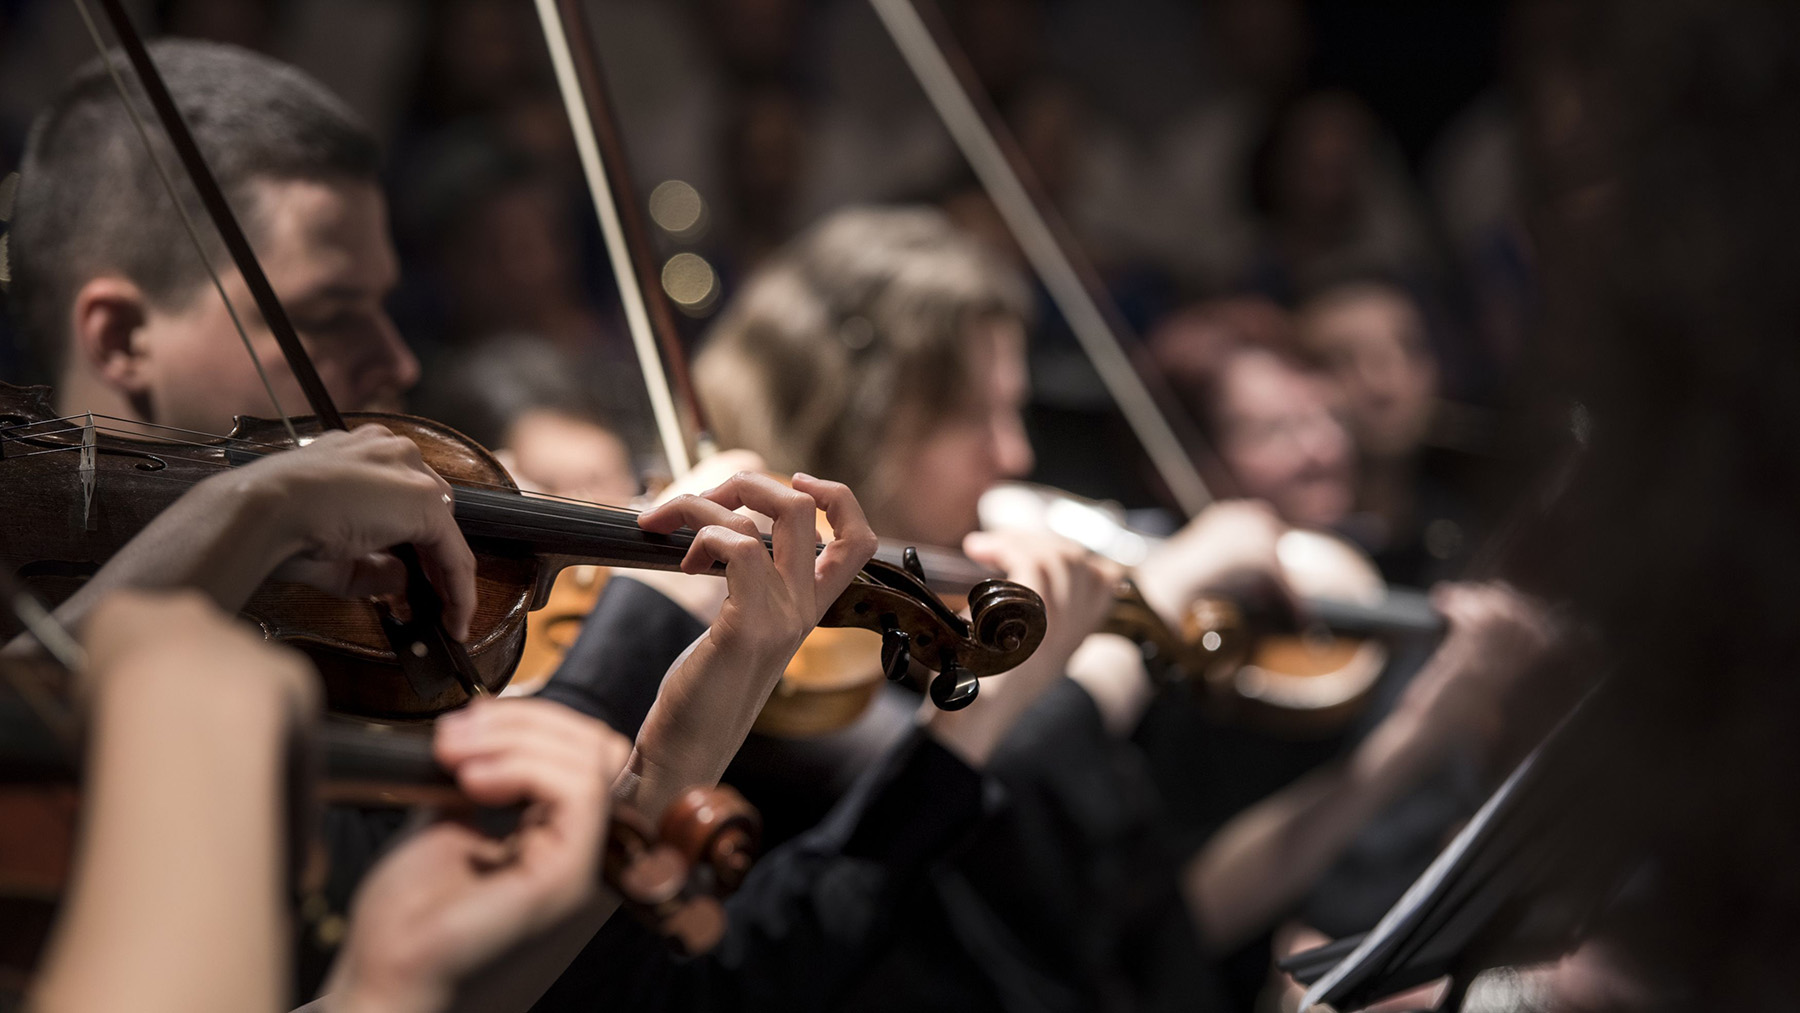 Stock photo of violinists performing in an orchestra